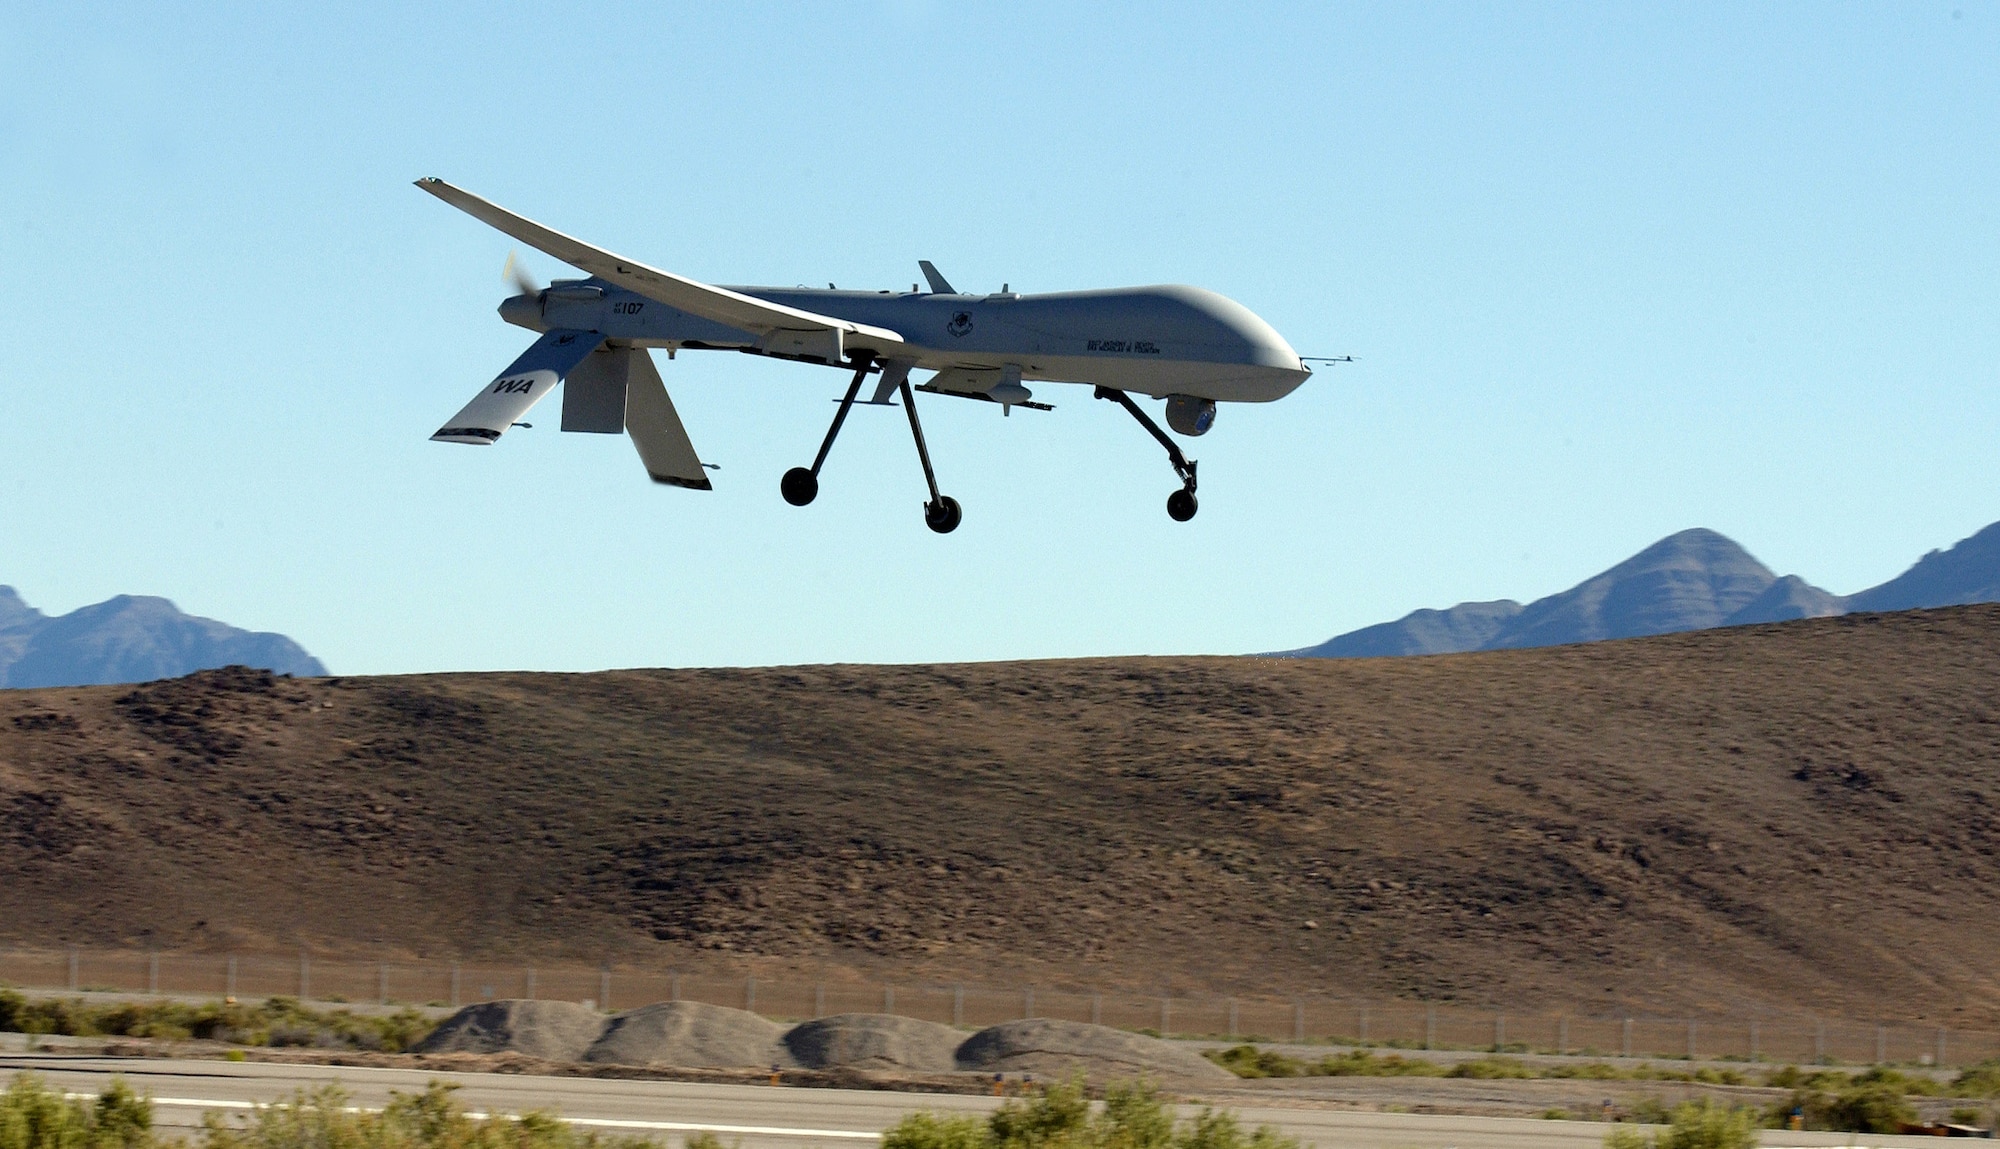 OVER NEVADA -- An MQ-1 Predator makes its final approach to Indian Springs Auxiliary Field.  The Predator has flown more than 27,000 hours supporting operations Enduring Freedom and Iraqi Freedom from June 2004 to June 2005.  (U.S. Air Force photo by Tech. Sgt. Kevin J. Gruenwald)